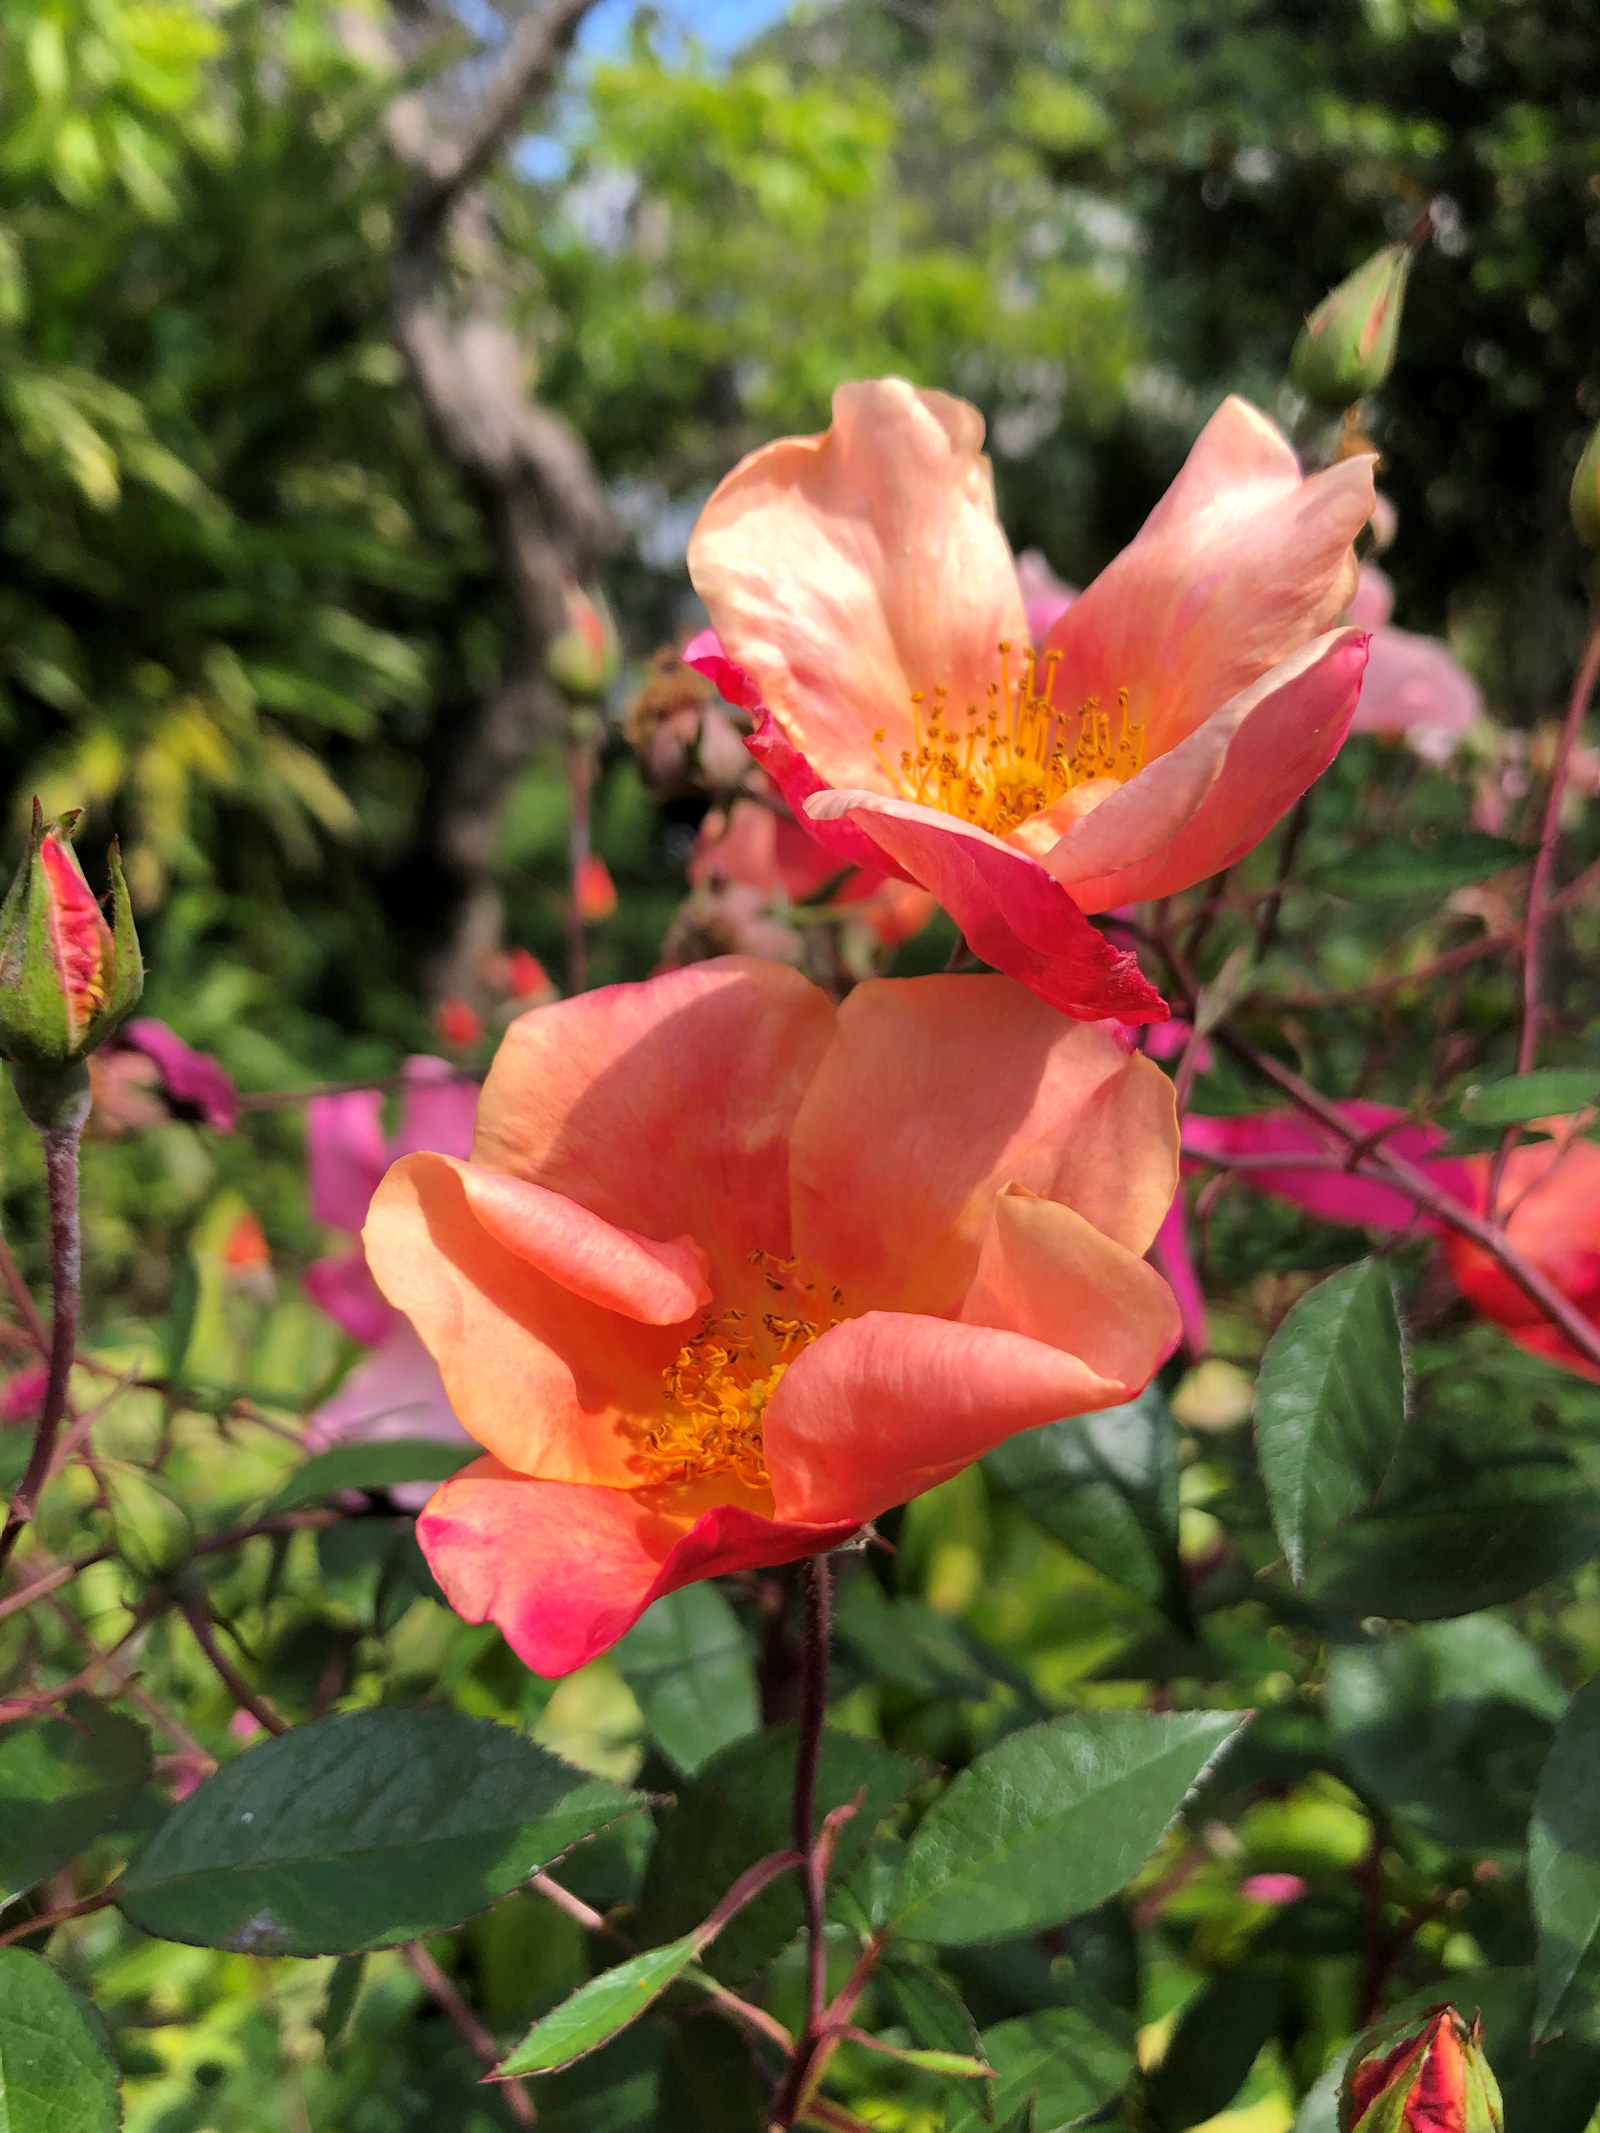 the pink apricot coloured rose or rosa mutabilis at Elizabeth farm with central yellow stamens